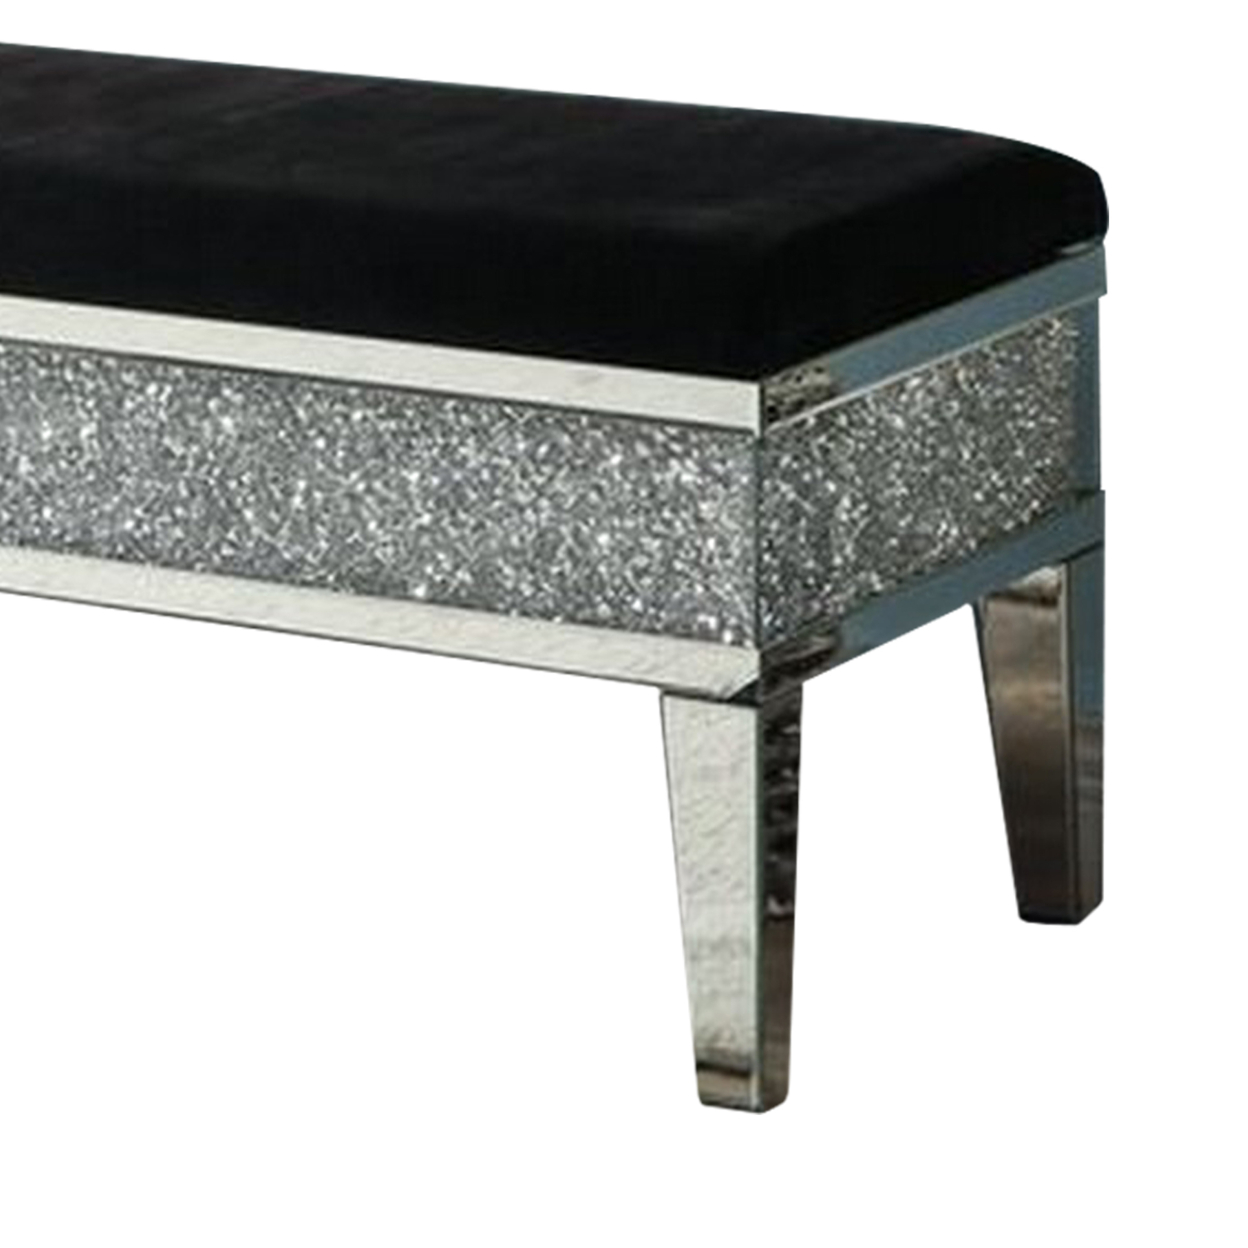 Mirrored Bench With Fabric Seat And Faux Diamonds, Silver- Saltoro Sherpi